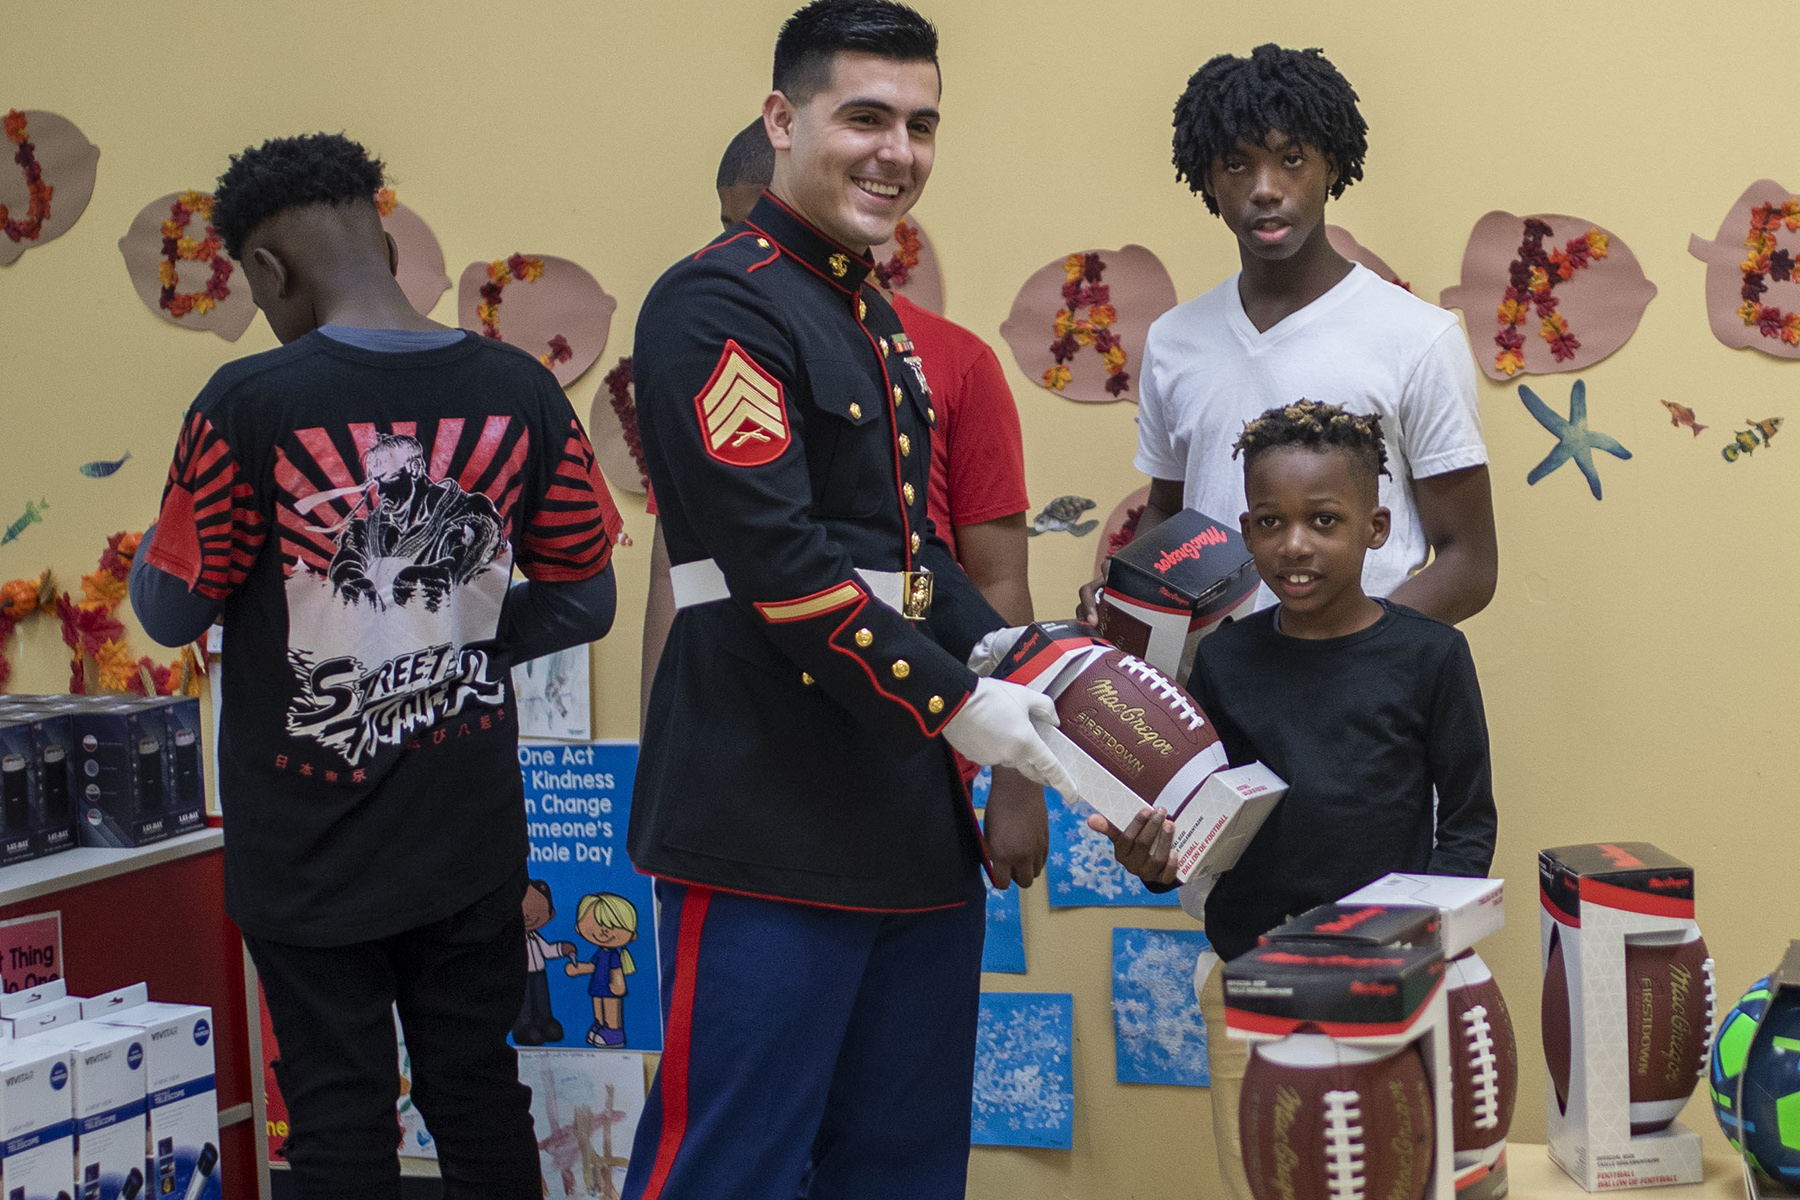 Smiling Marine hands football to boy at Toys for Tots event.